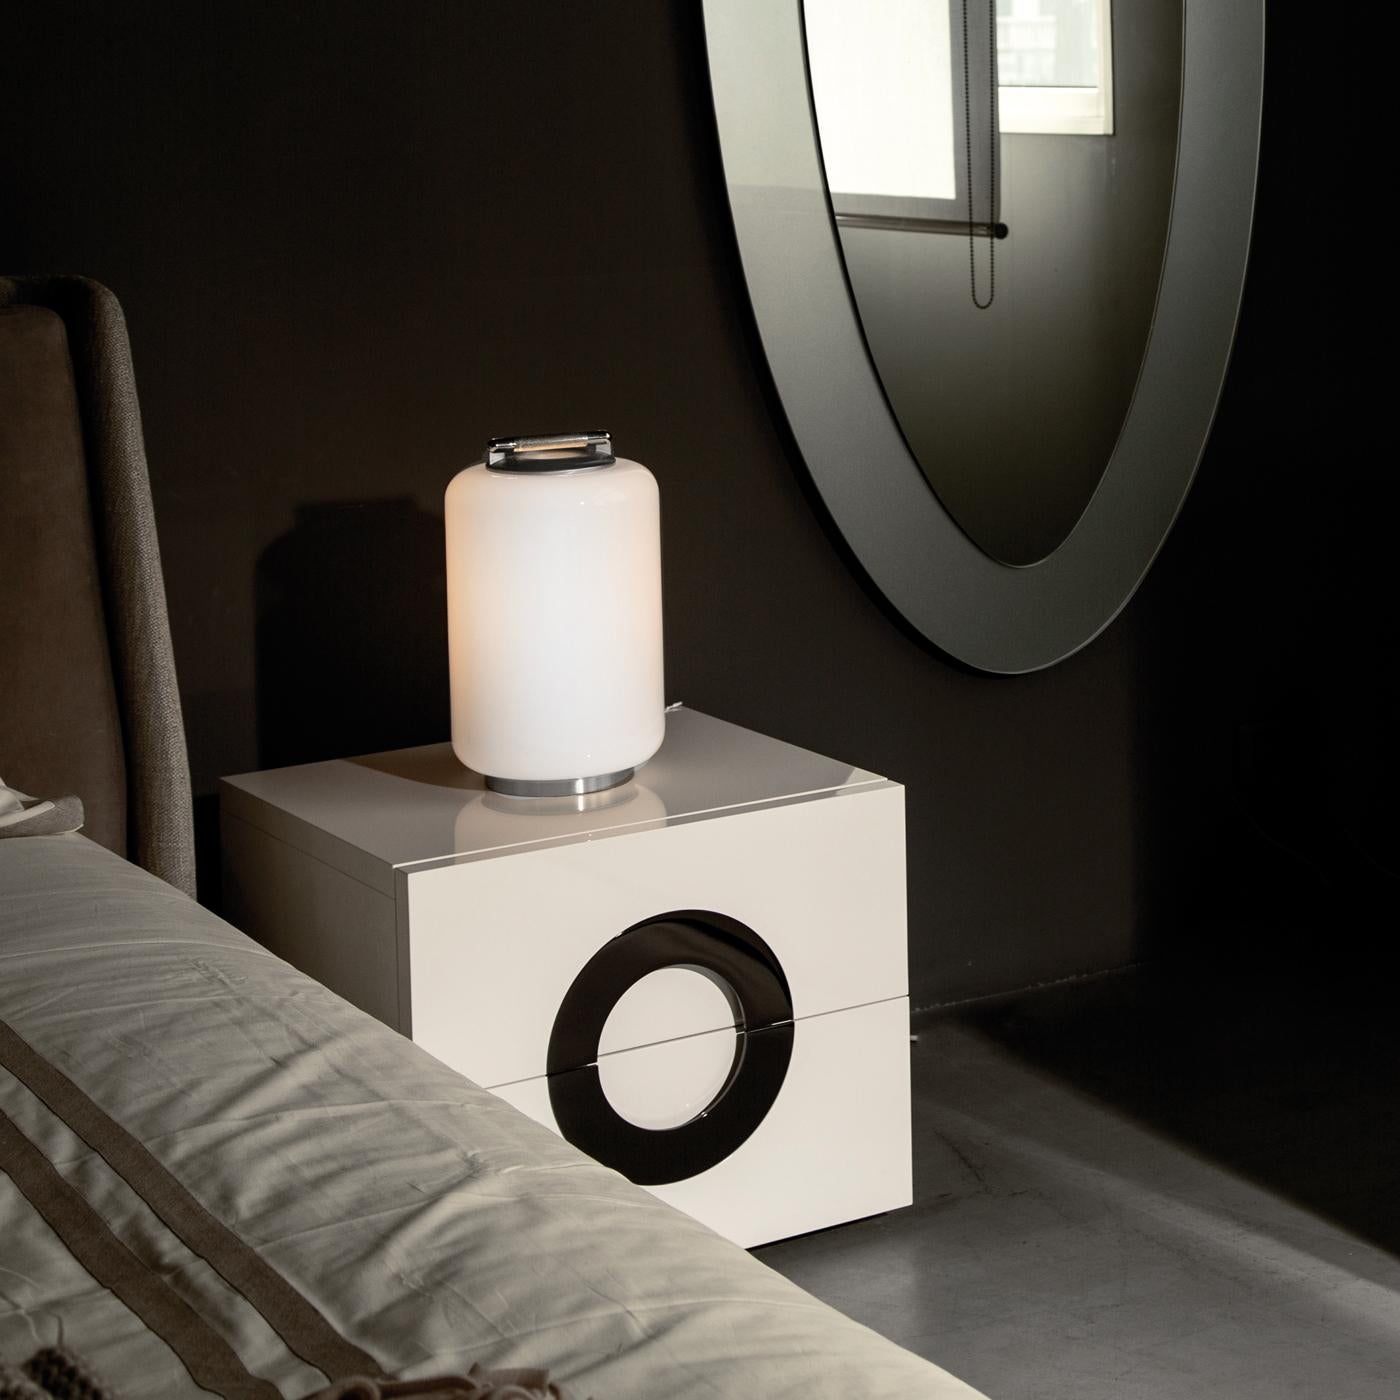 The Air Kan is a modern and stylish collection of table and bedside table lamps that diffuse a soft, ambient light with an exclusive and attractive look. Consisting of a satin nickel frame enriched by a cylindrical diffuser of white hand-blown